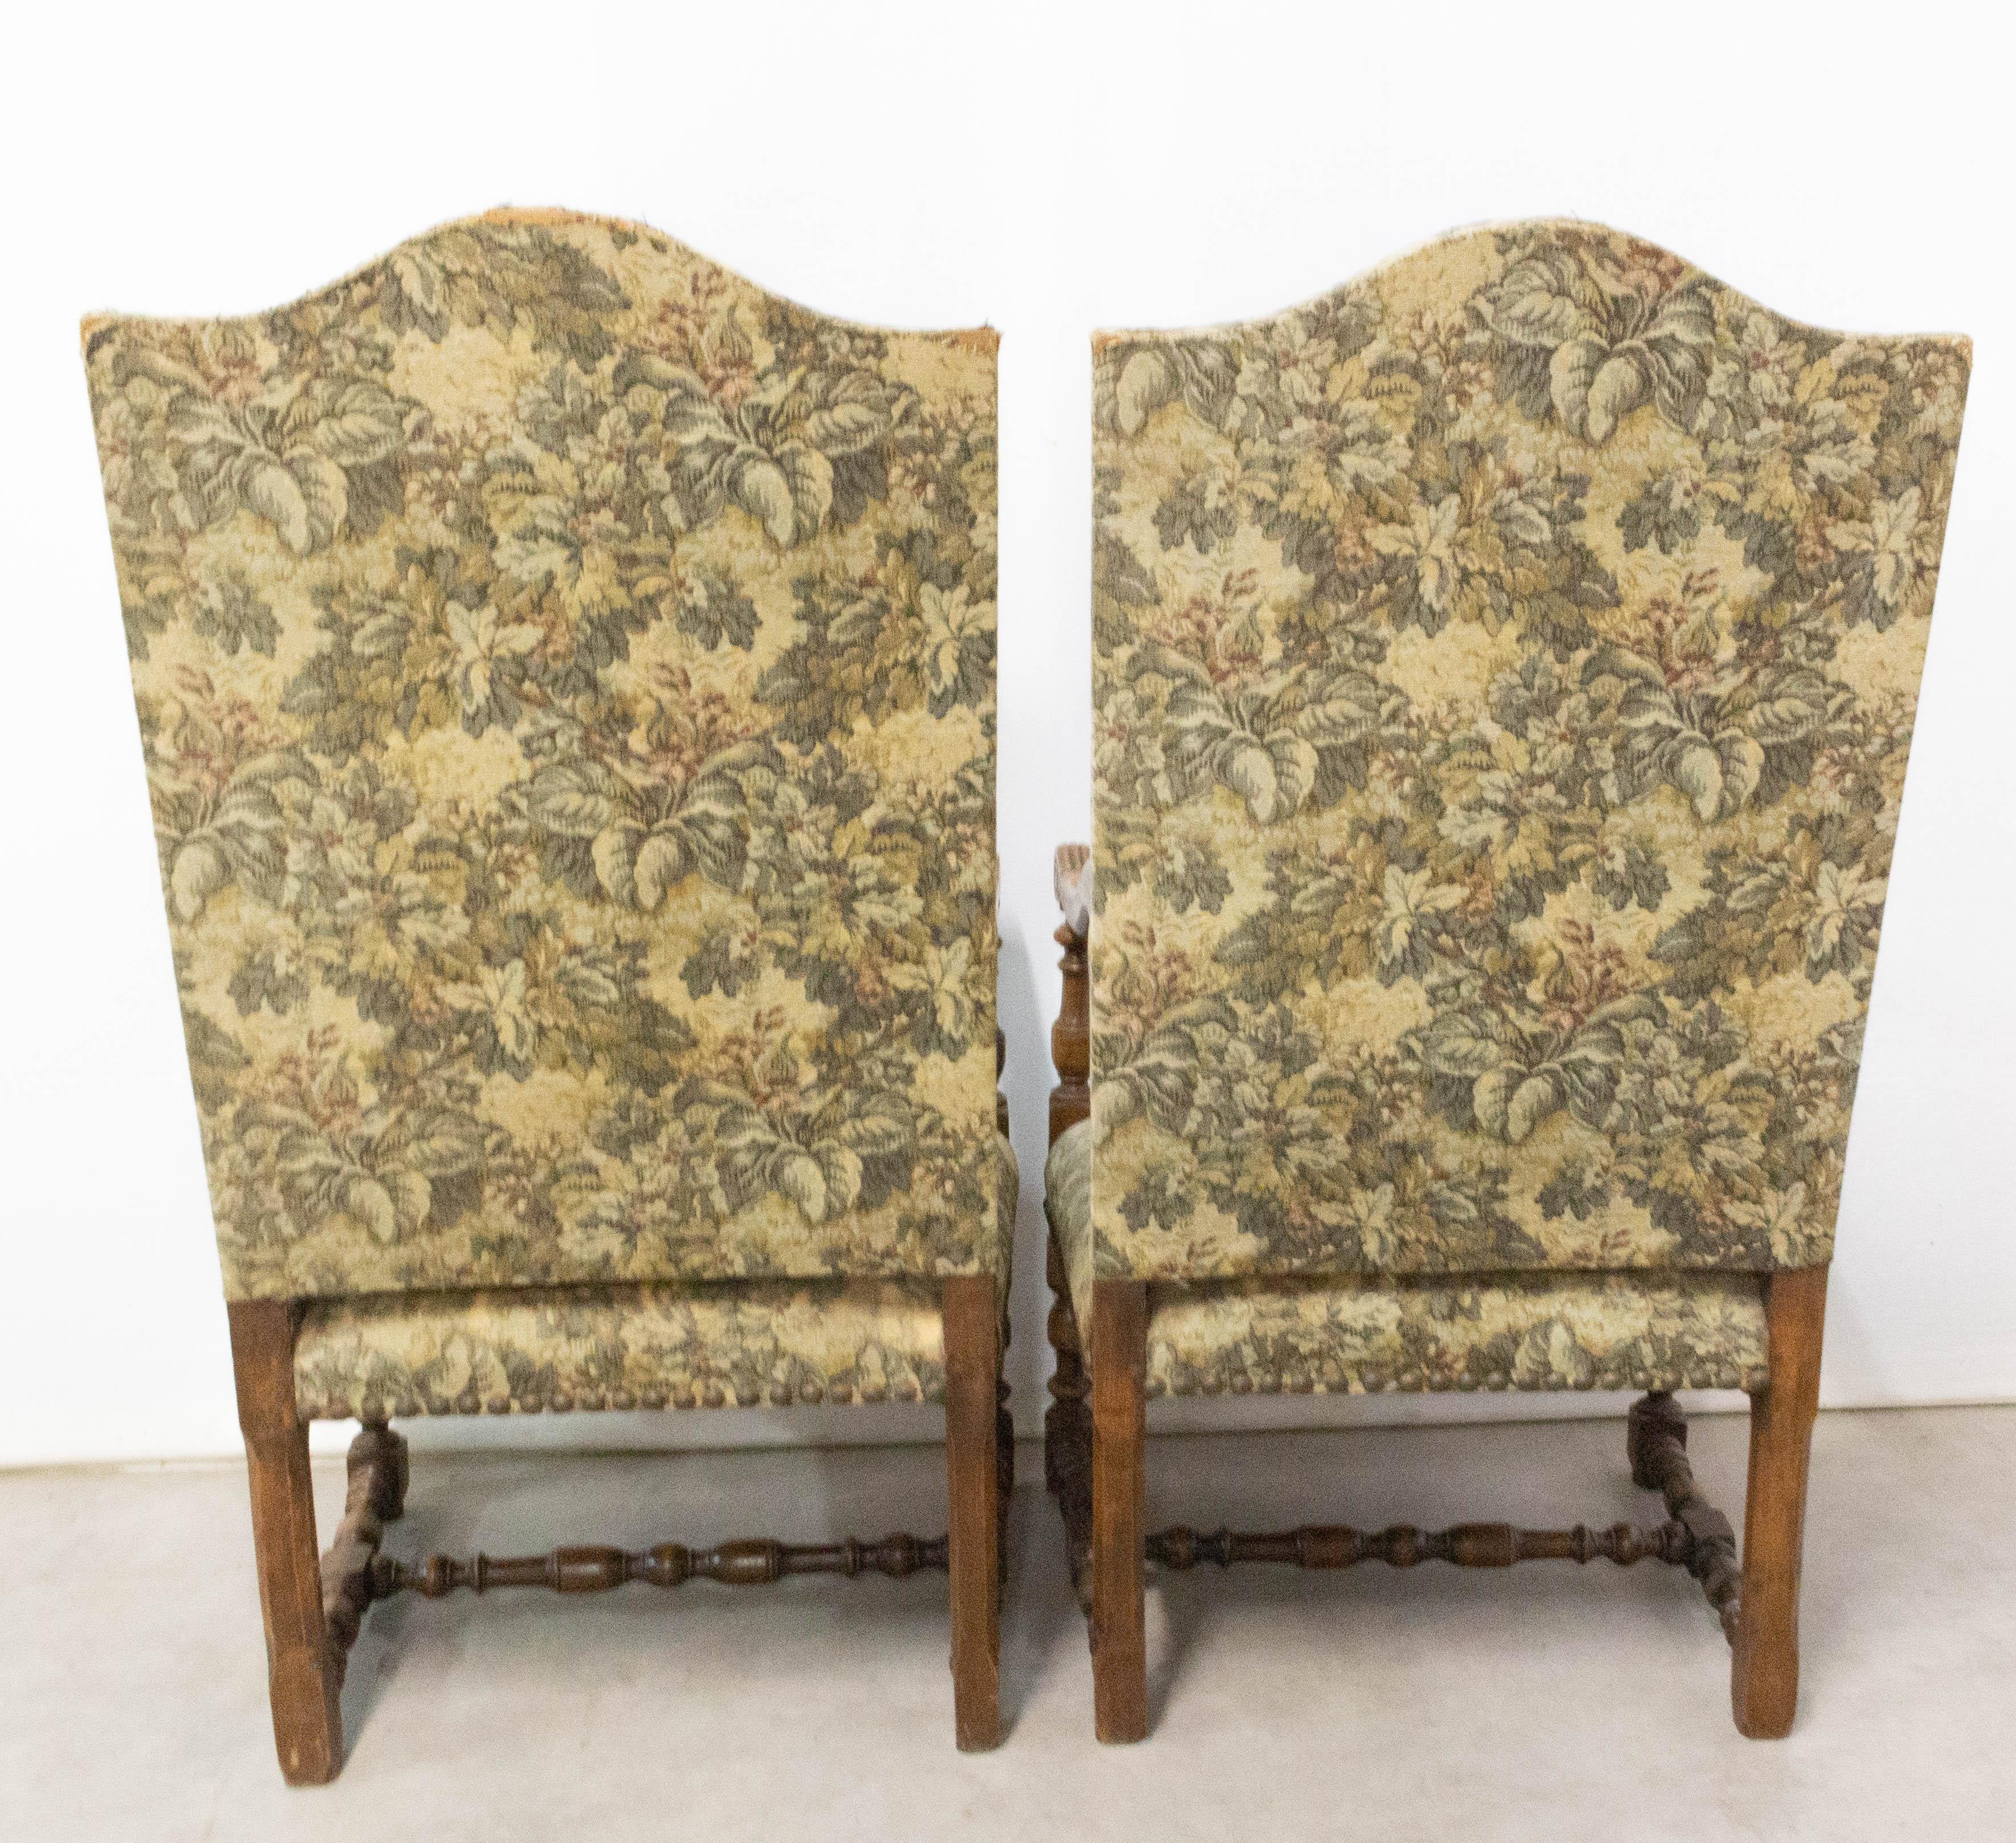 Pair of Louis XIV Revival Armchairs French, Midcentury to Be Re-Upholstered 3